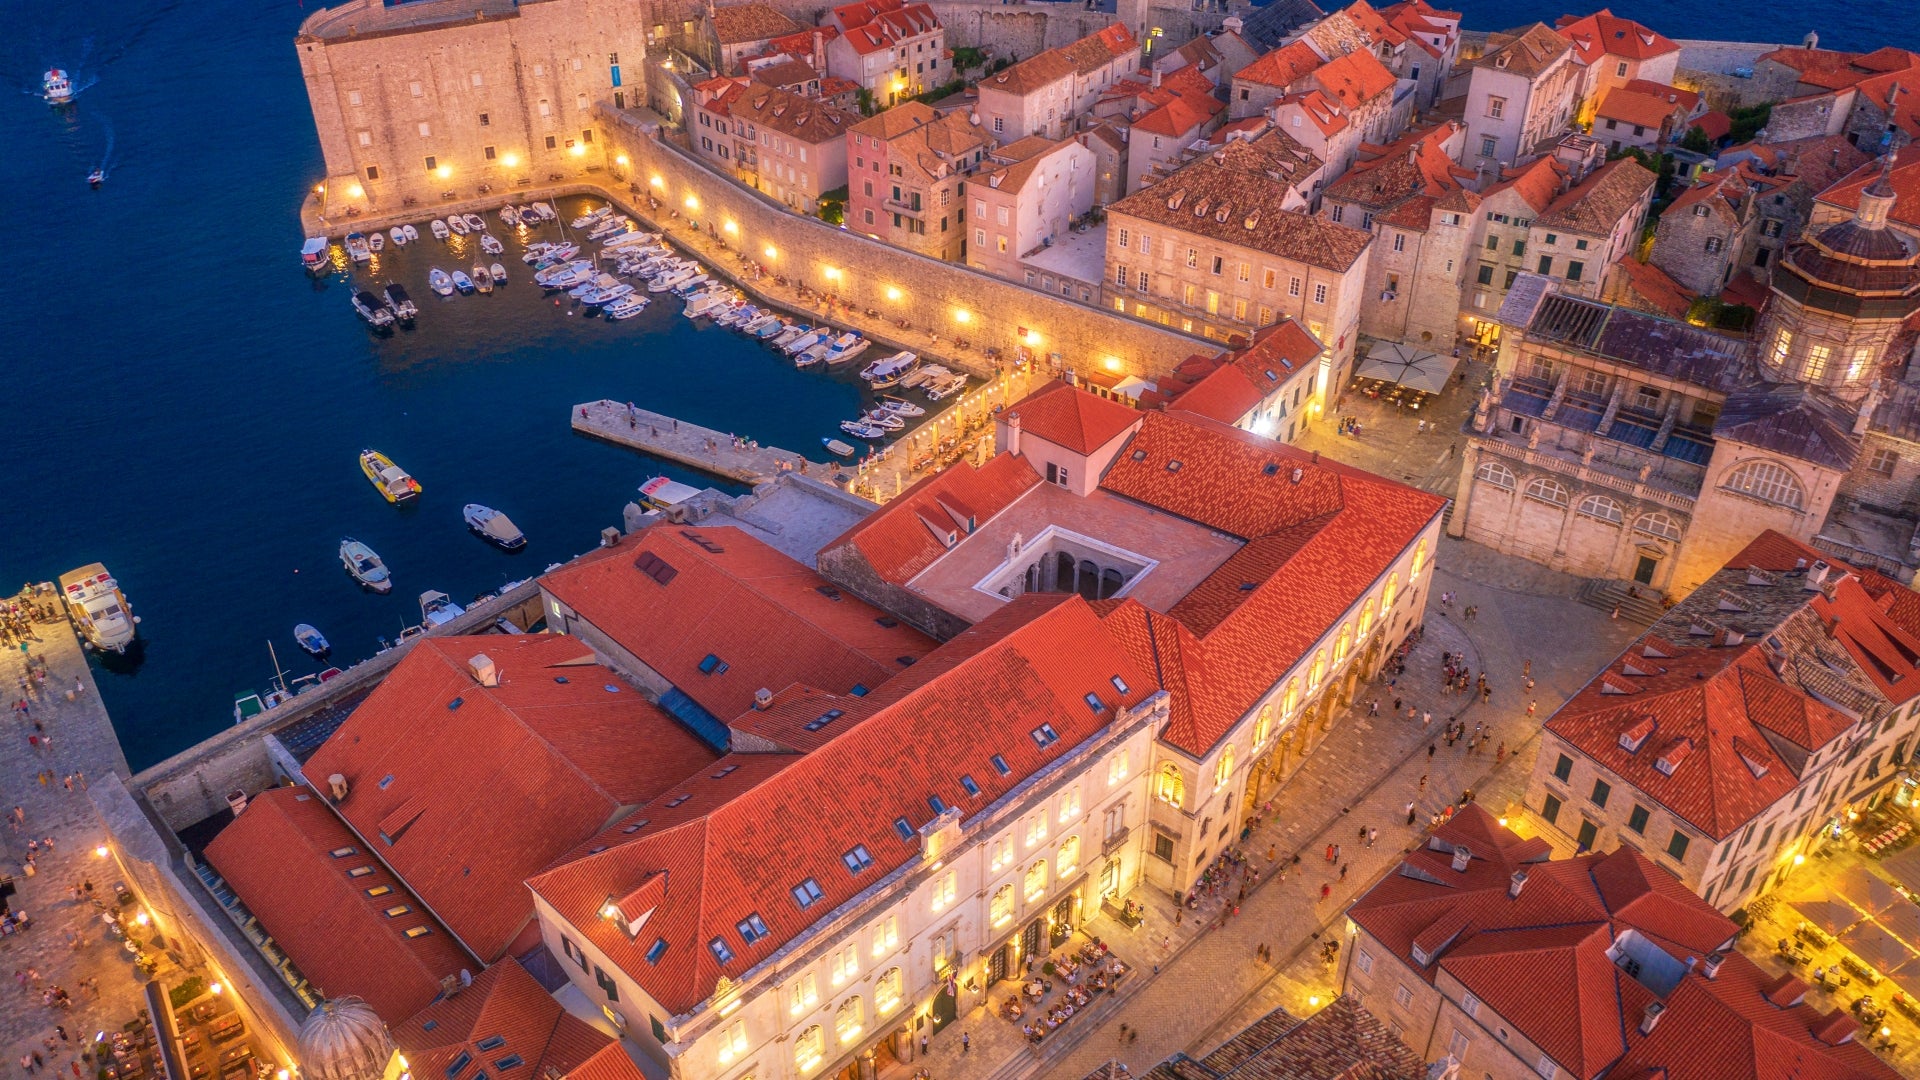 aerial-view-of-houses-with-red-roofs-at-night-in-dubrovnik